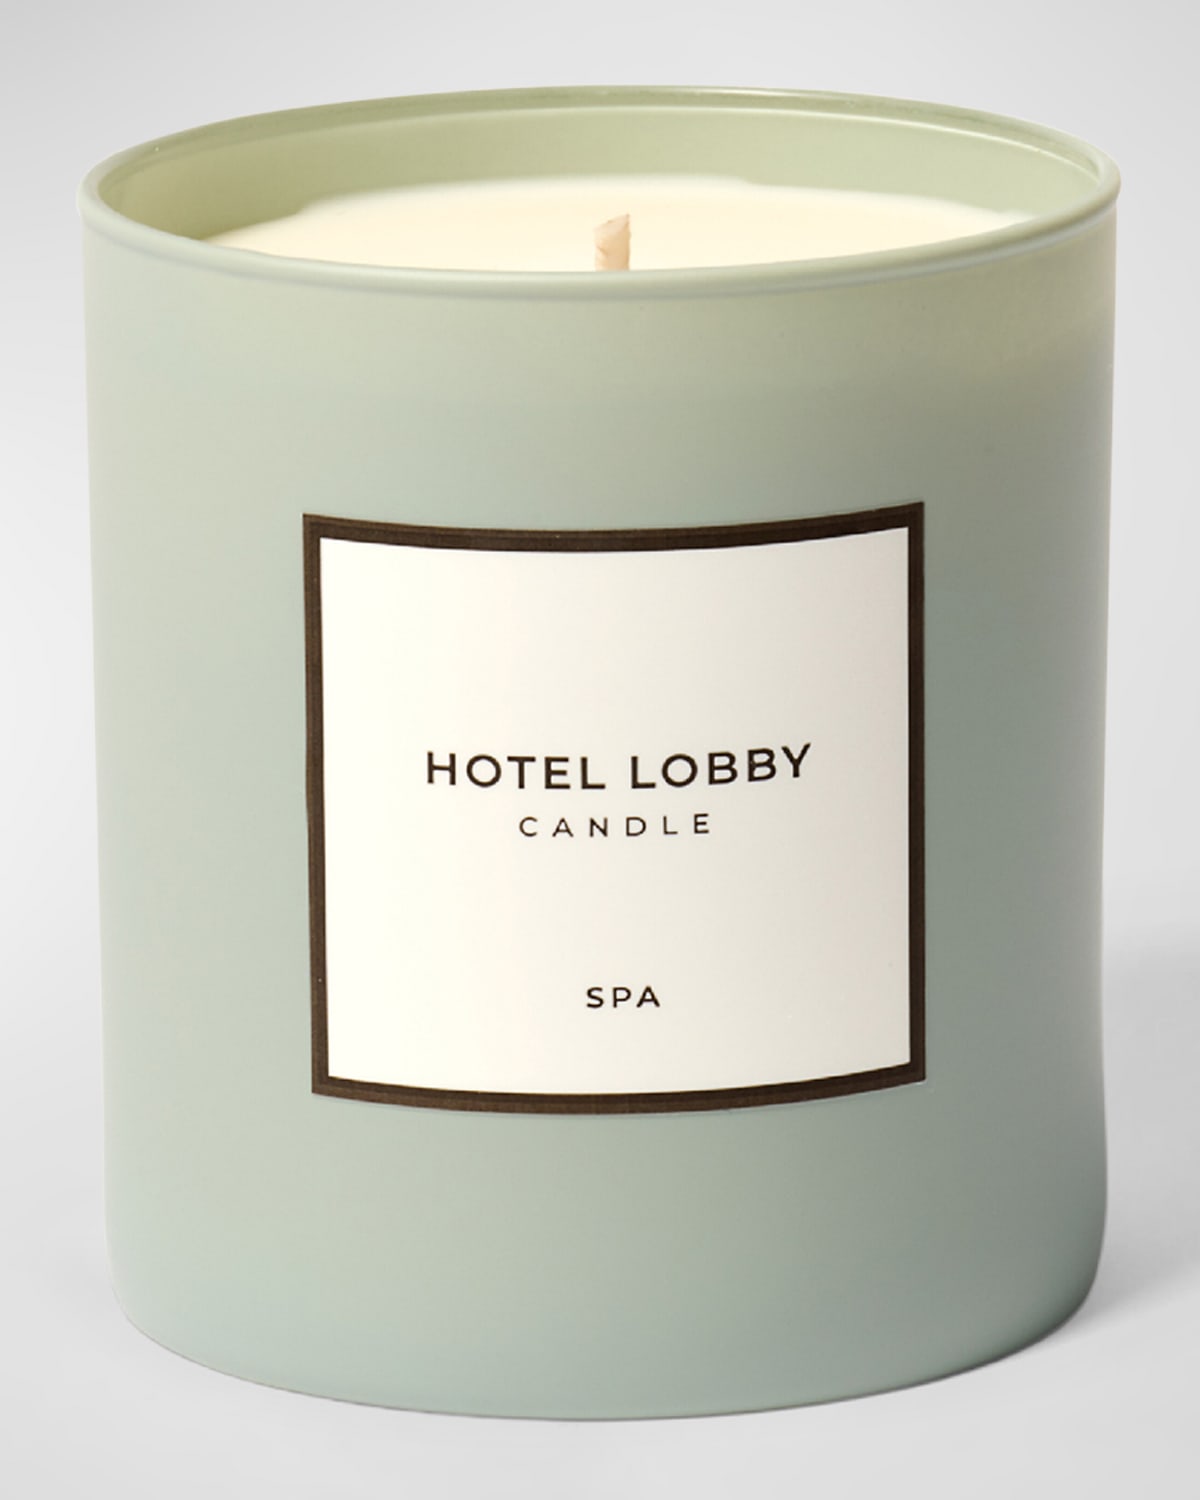 Hotel Lobby Candle 9.75 Oz. Spa Candle